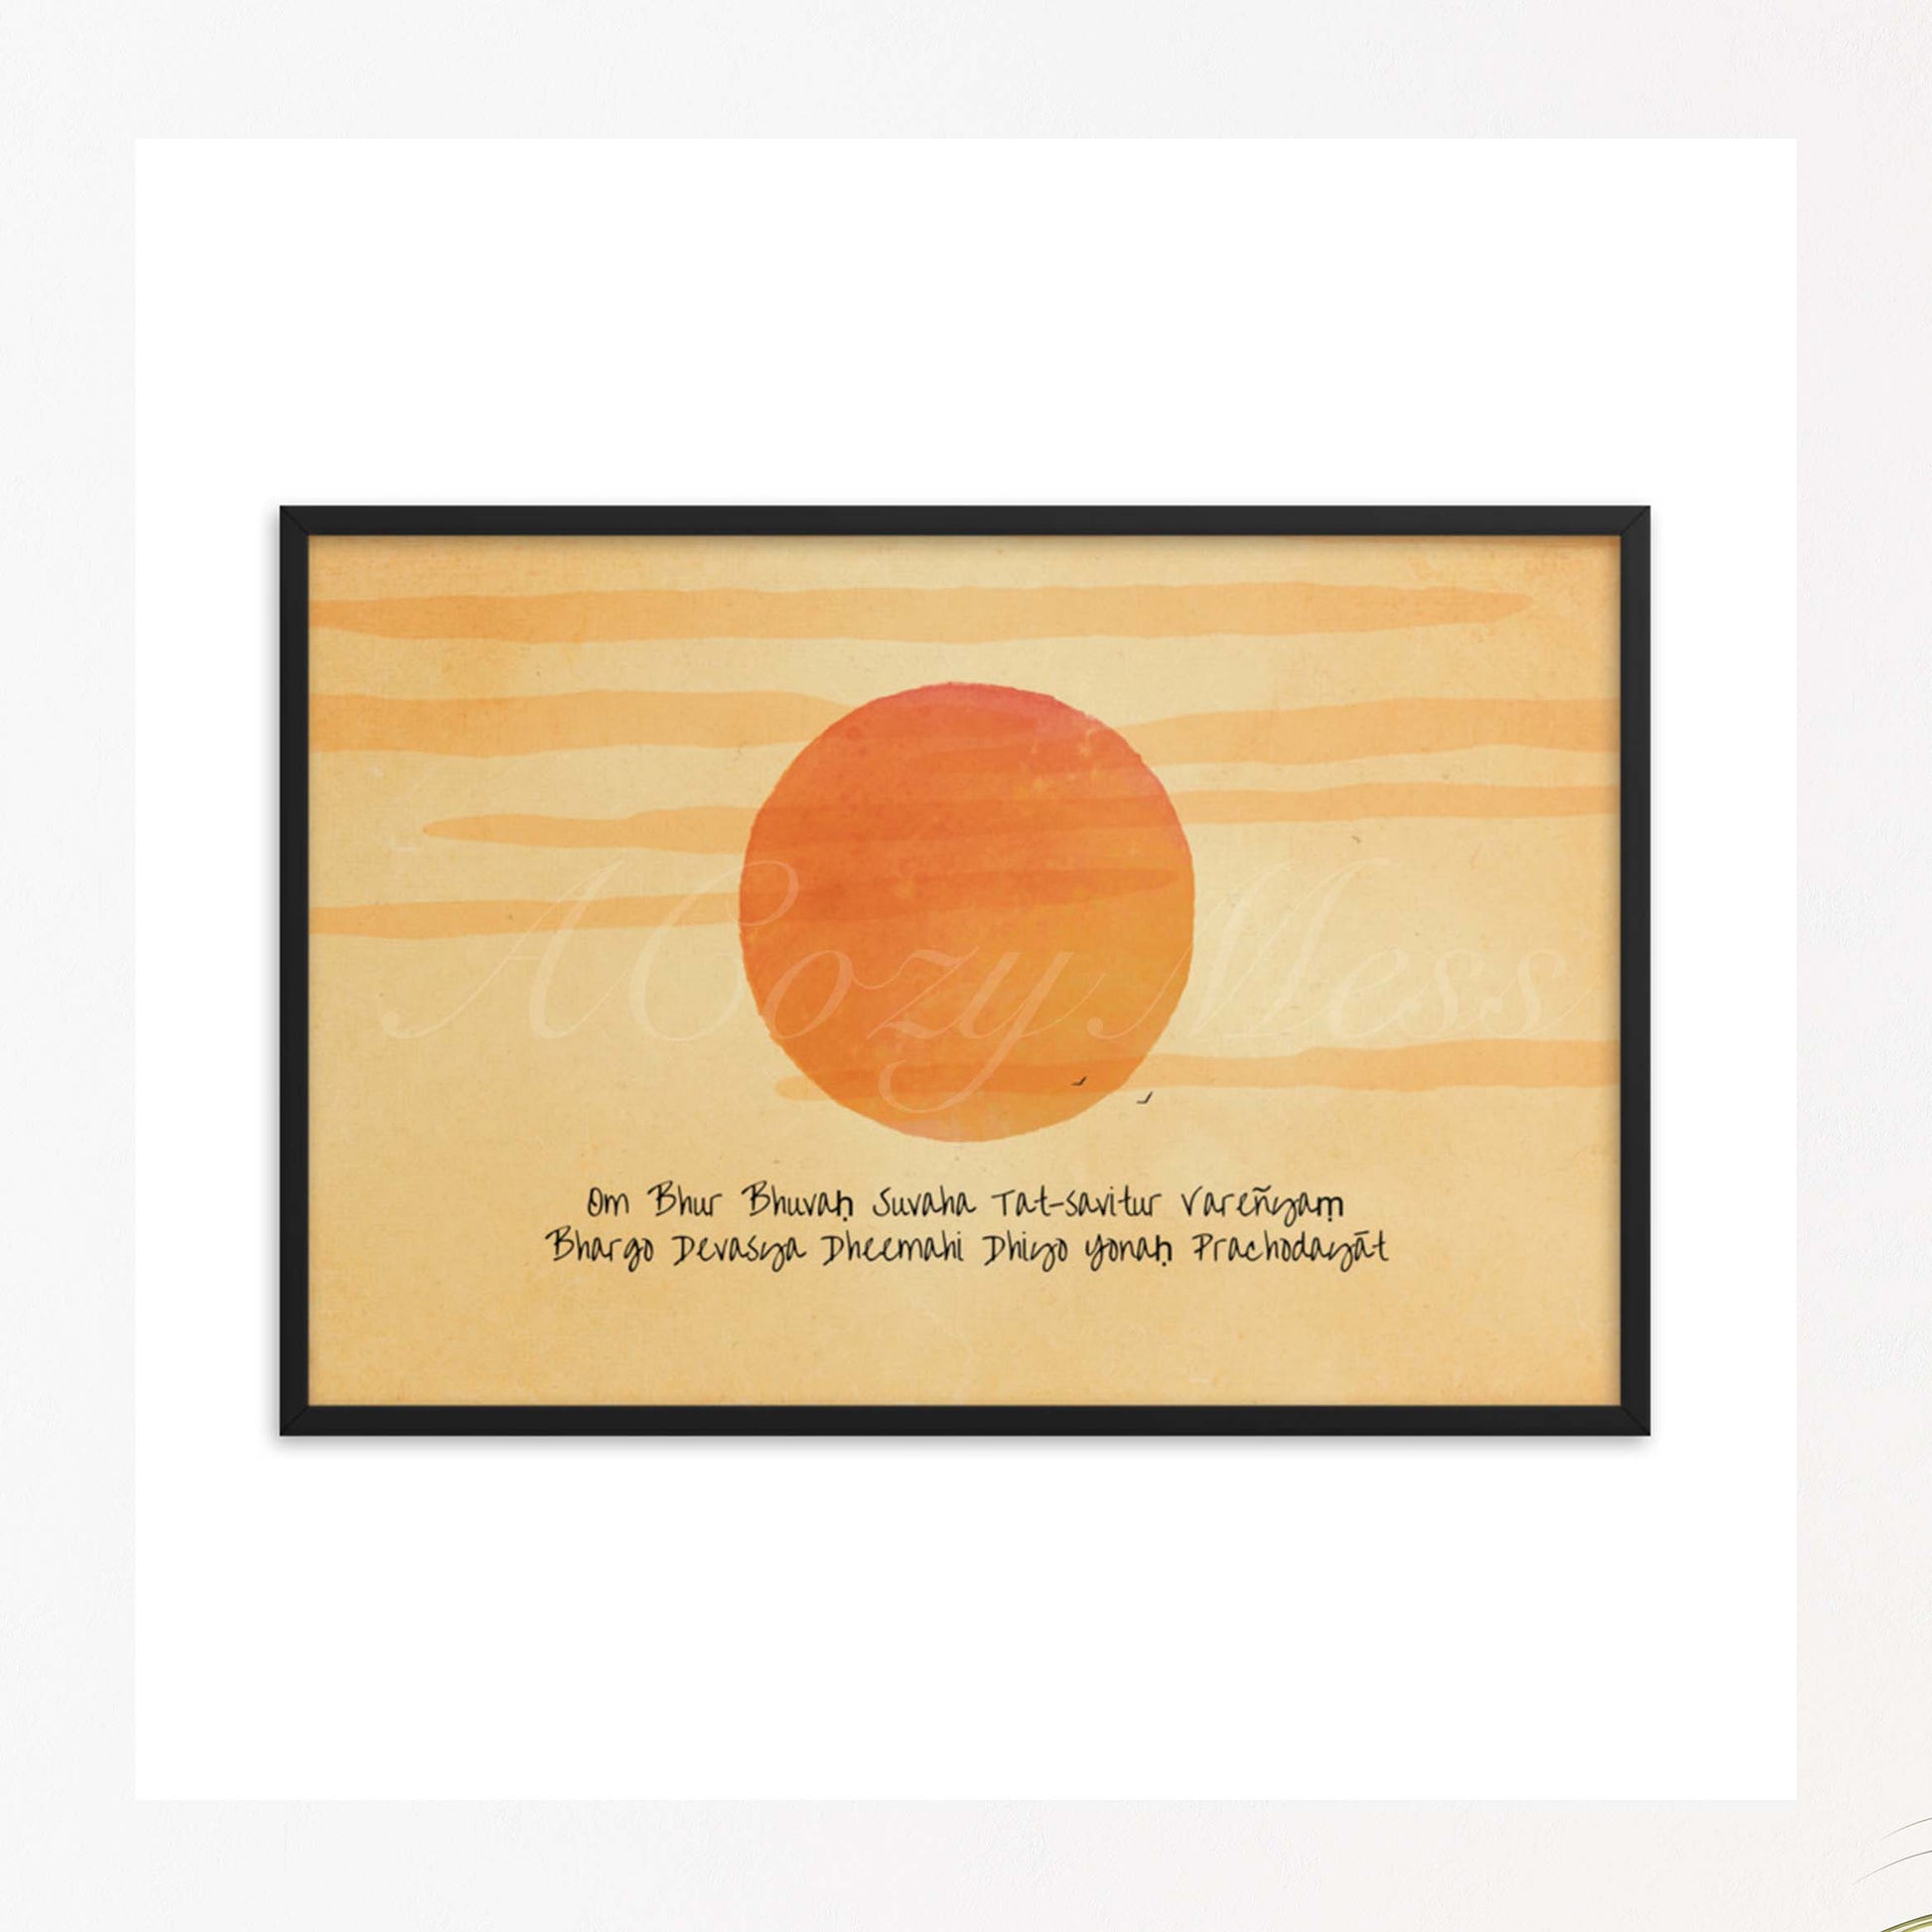 A wall art print featuring the Gayatri Mantra overlaid on a radiant sunburst, creating a spiritually uplifting and visually captivating artwork in black frame